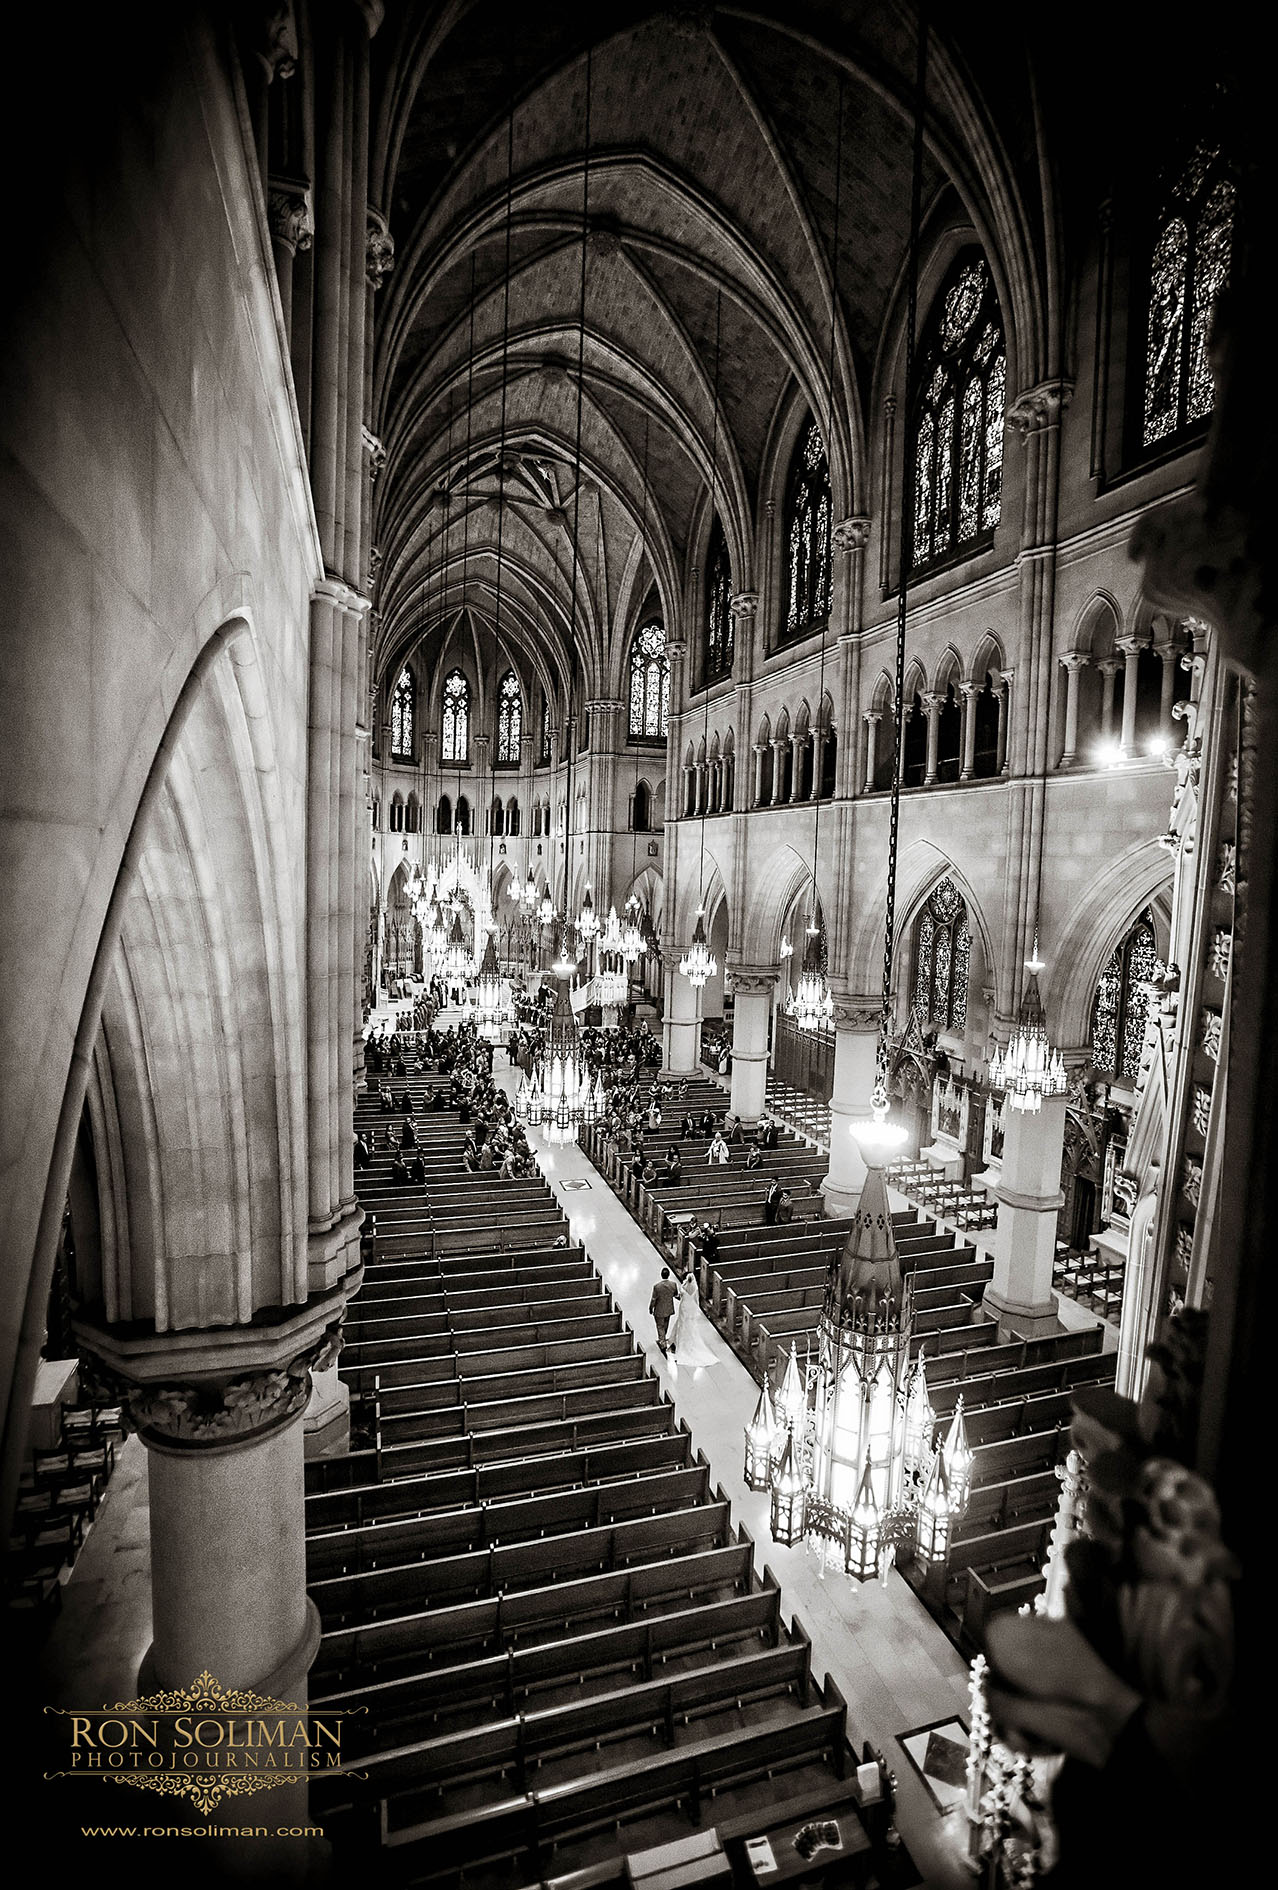 Cathedral Basilica of the Sacred Heart wedding photos